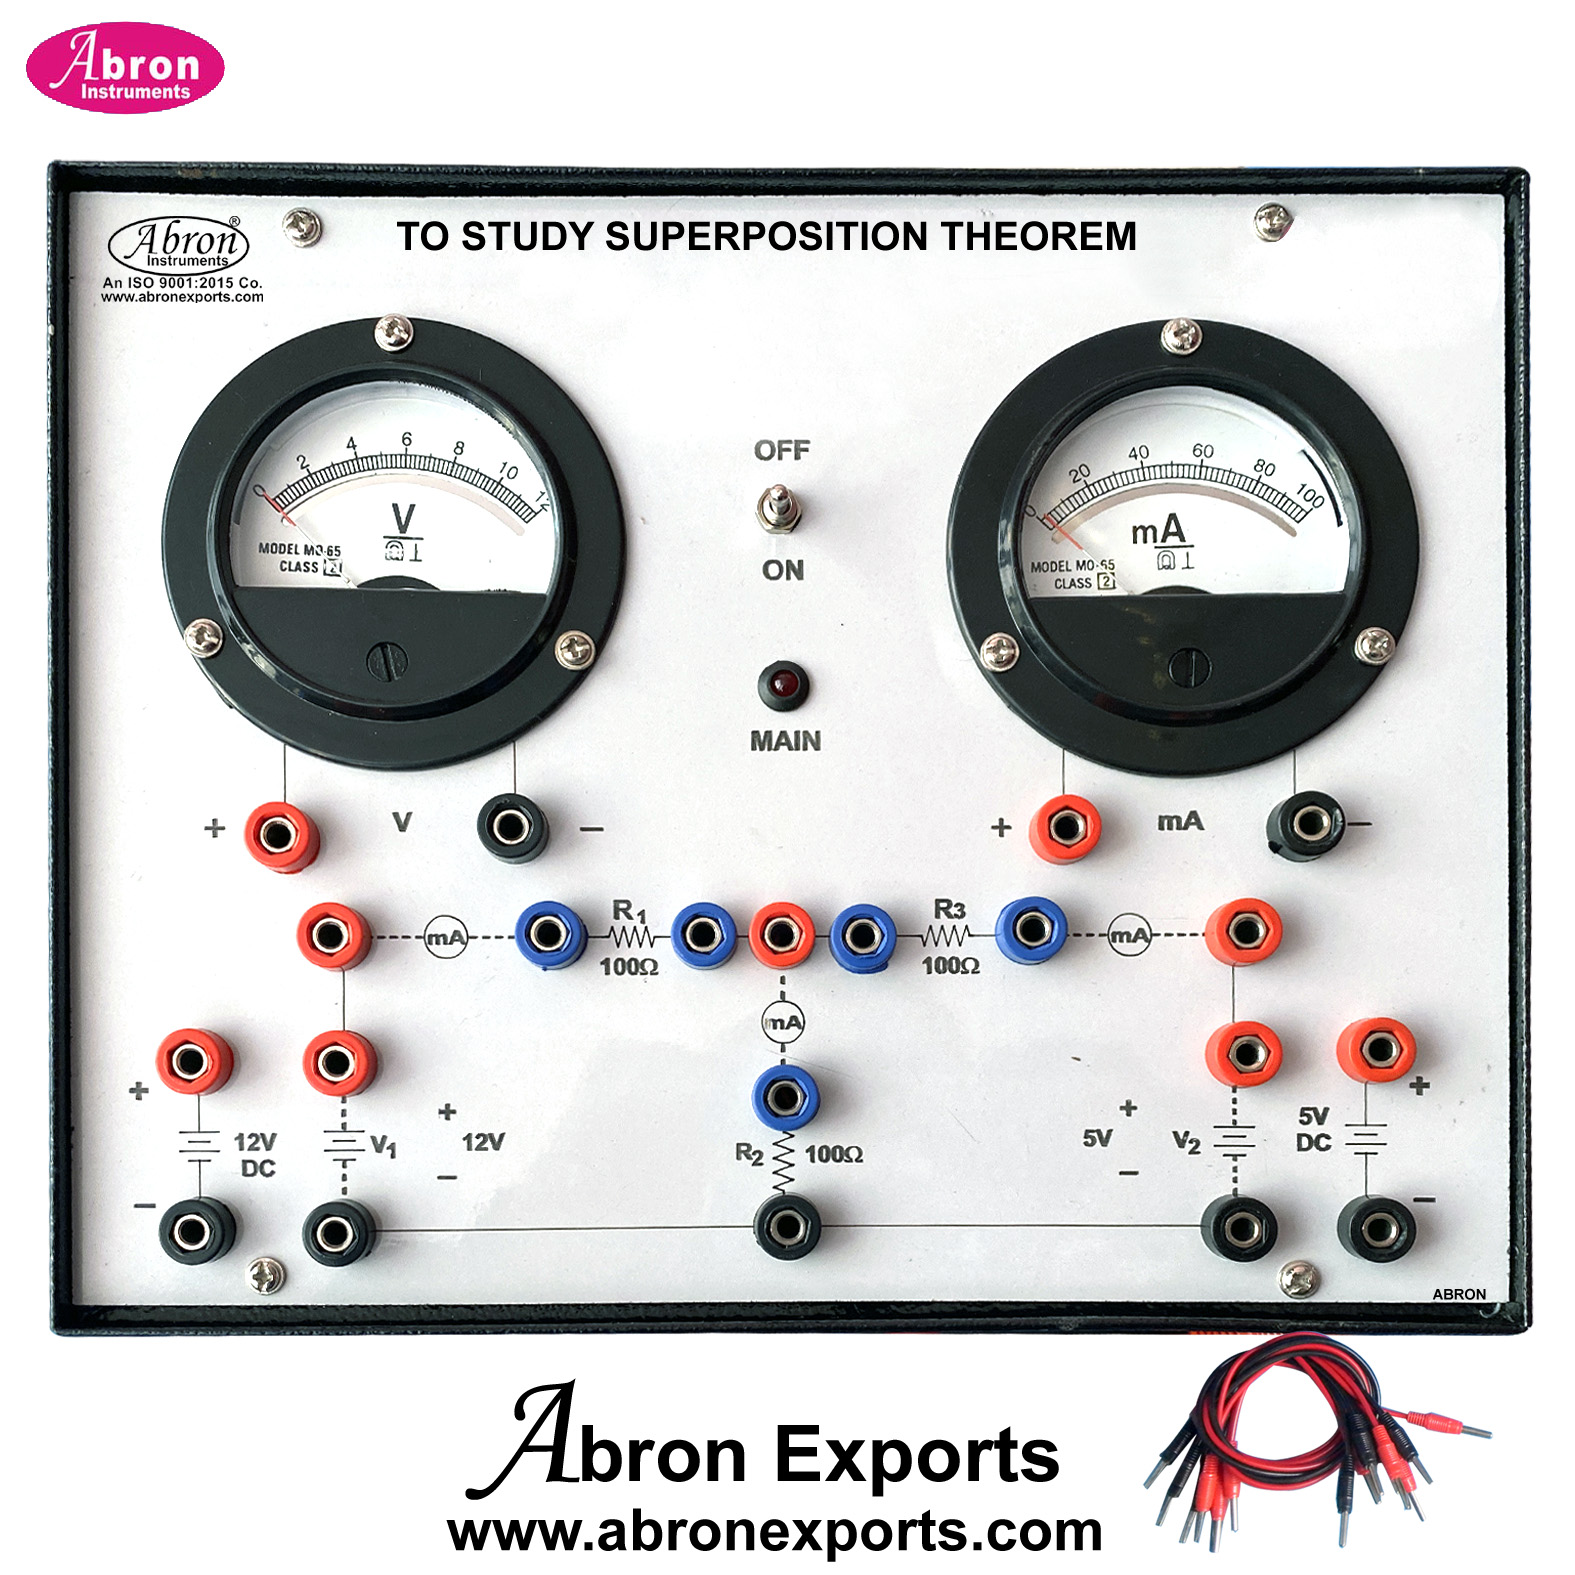 Study Theorem Super Position Theorem With Power Supply 2 Meters Electronic Trainer Kit Abron AE-1430SU 